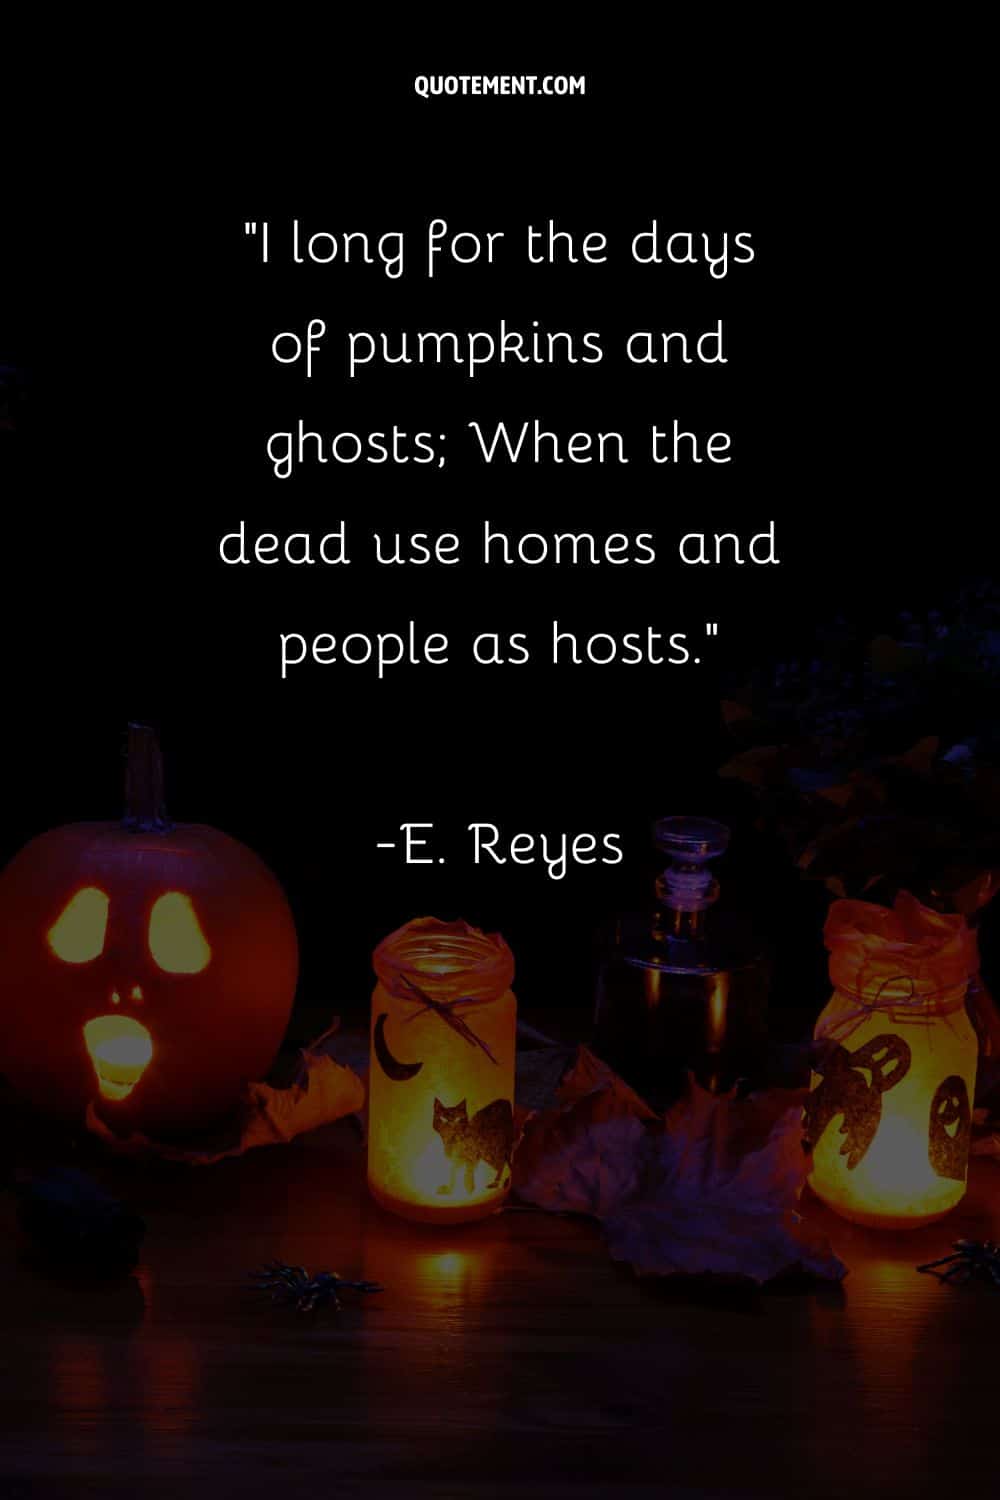 I long for the days of pumpkins and ghosts; When the dead use homes and people as hosts